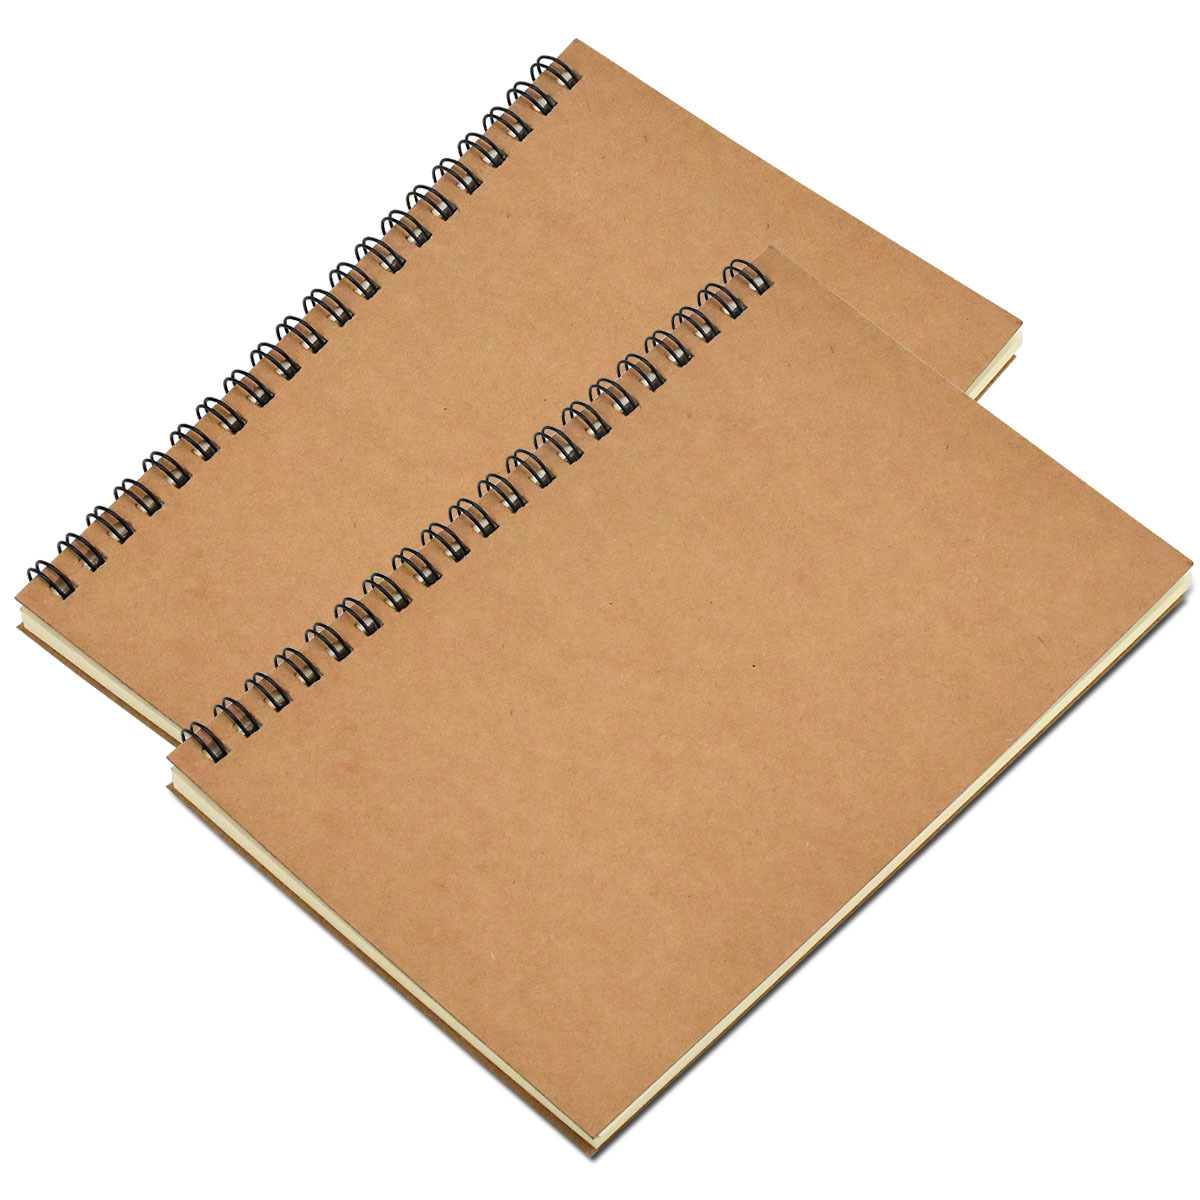 Sketchbook for Boys: Large 200 pages blank Drawing pad for